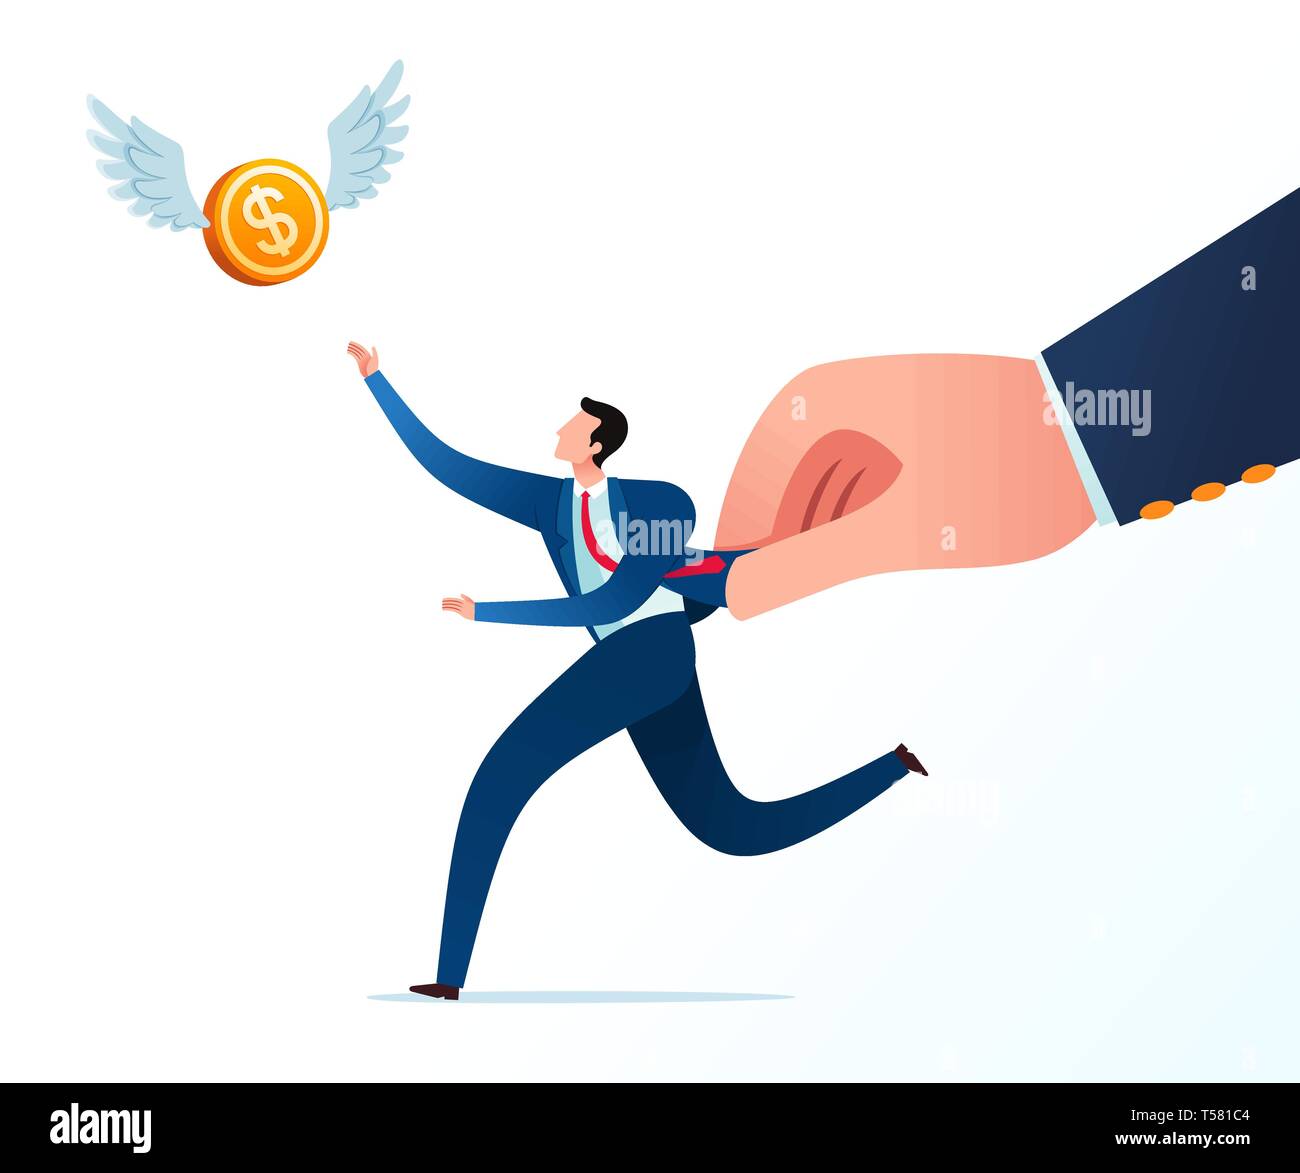 Get hold by boss while chase flying money in the sky. Business concept illustration. Stock Vector